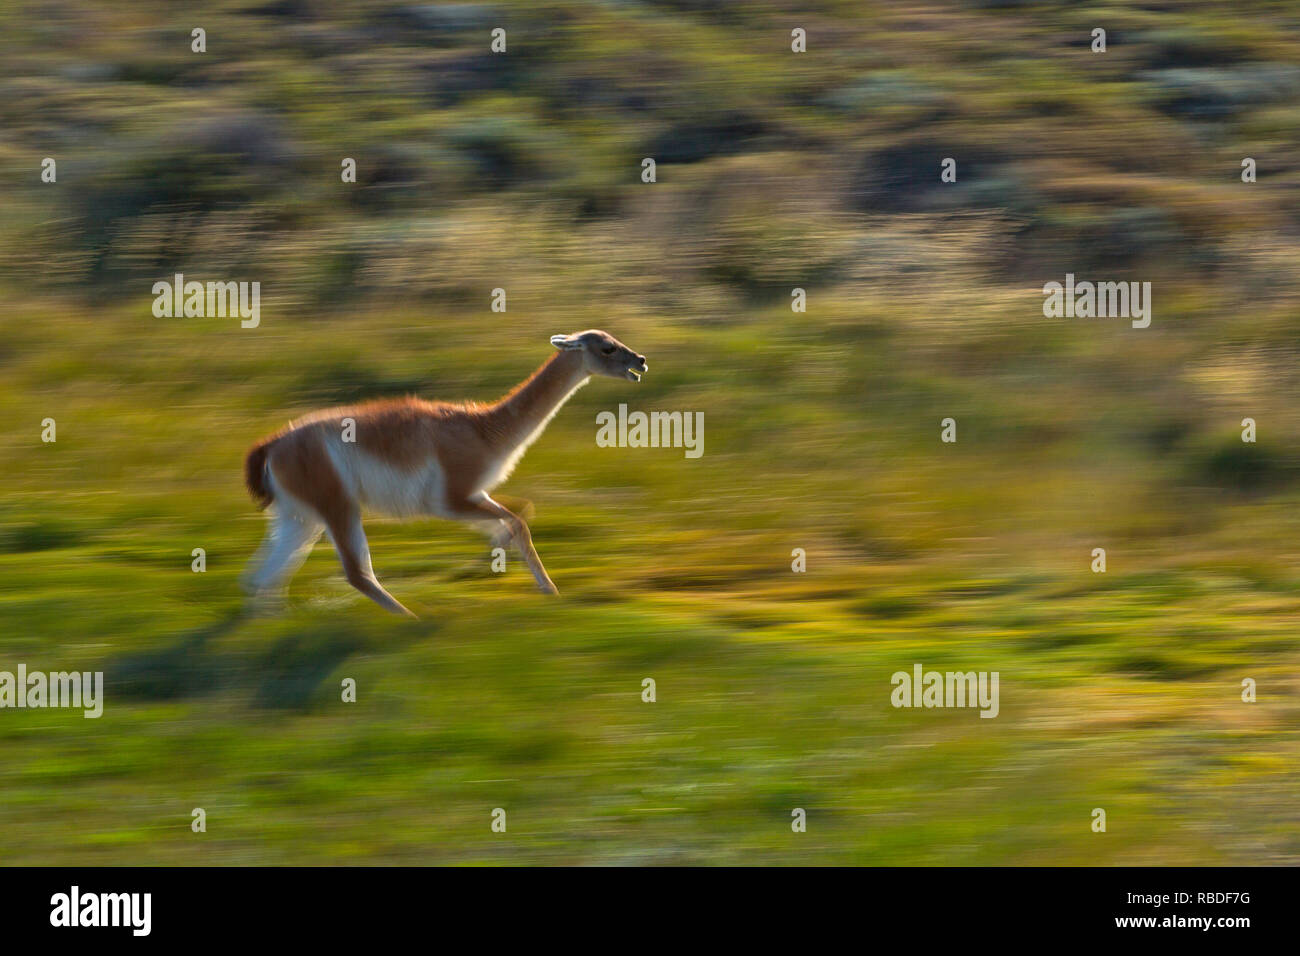 A running Guanaco (Lama guanicoe) in Torres Del Paine National Park of Chile. Wild Stock Photo